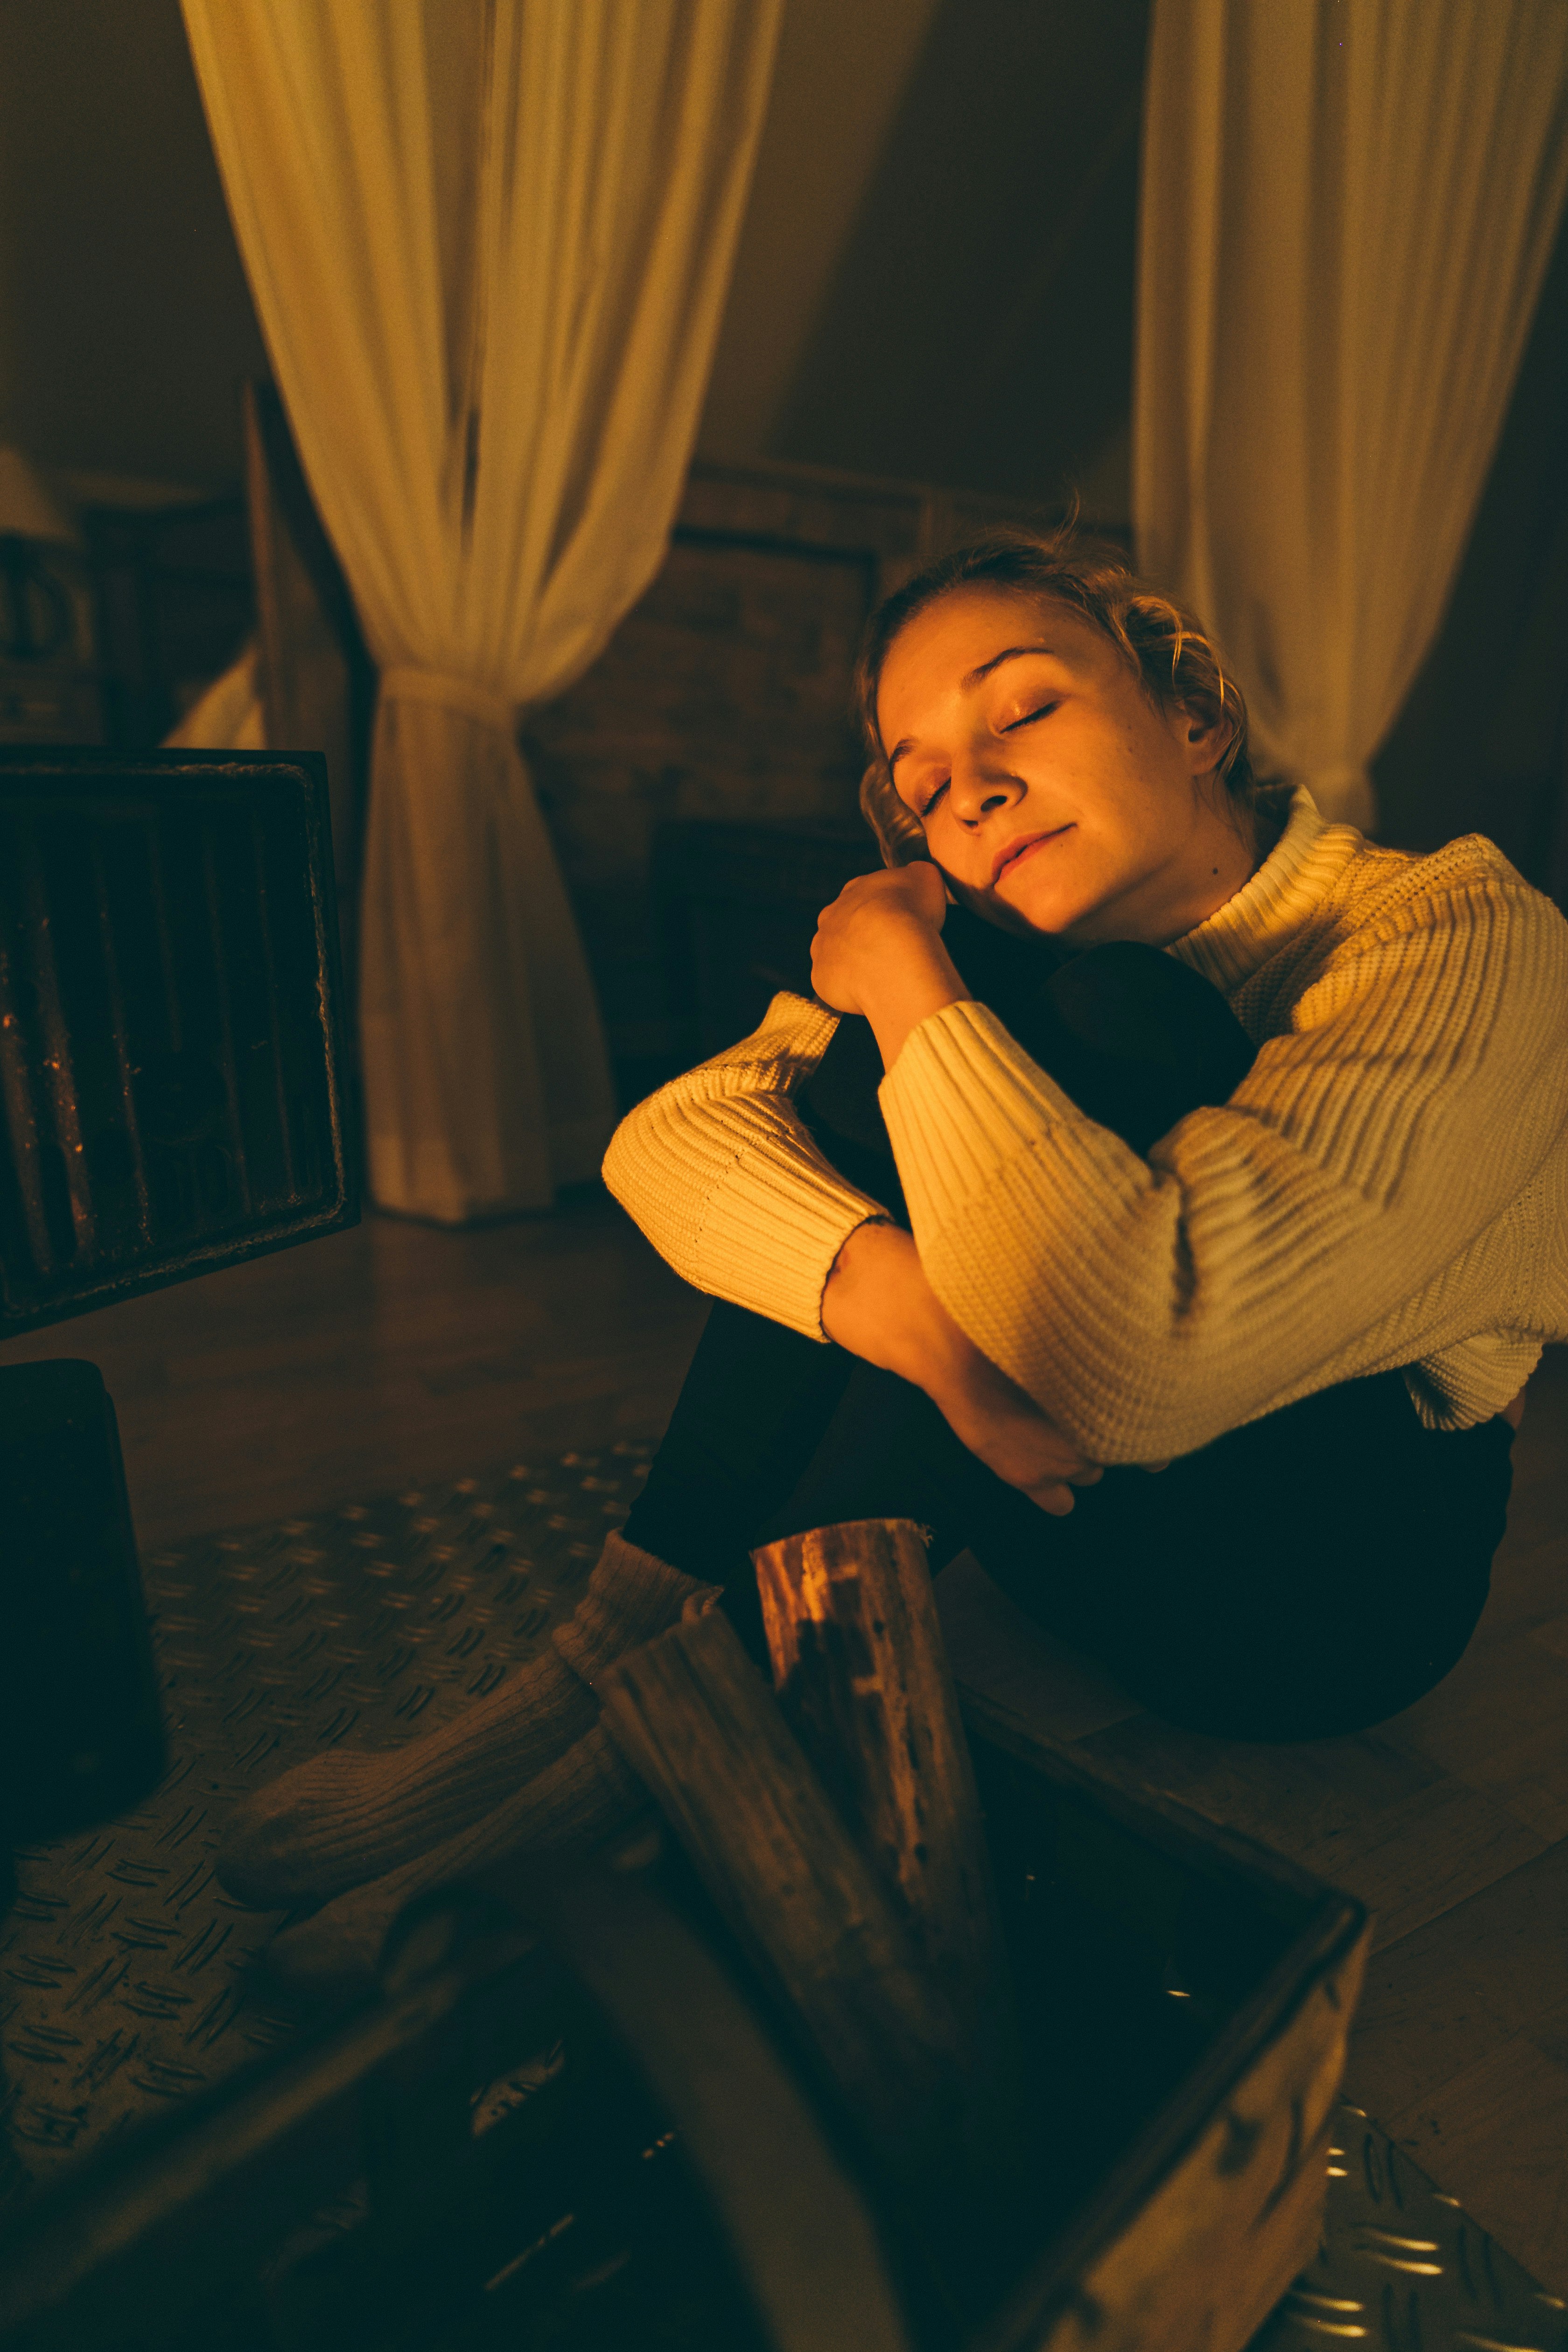 Girl Nastja in cottage with warming fire III by Thomas Vitali